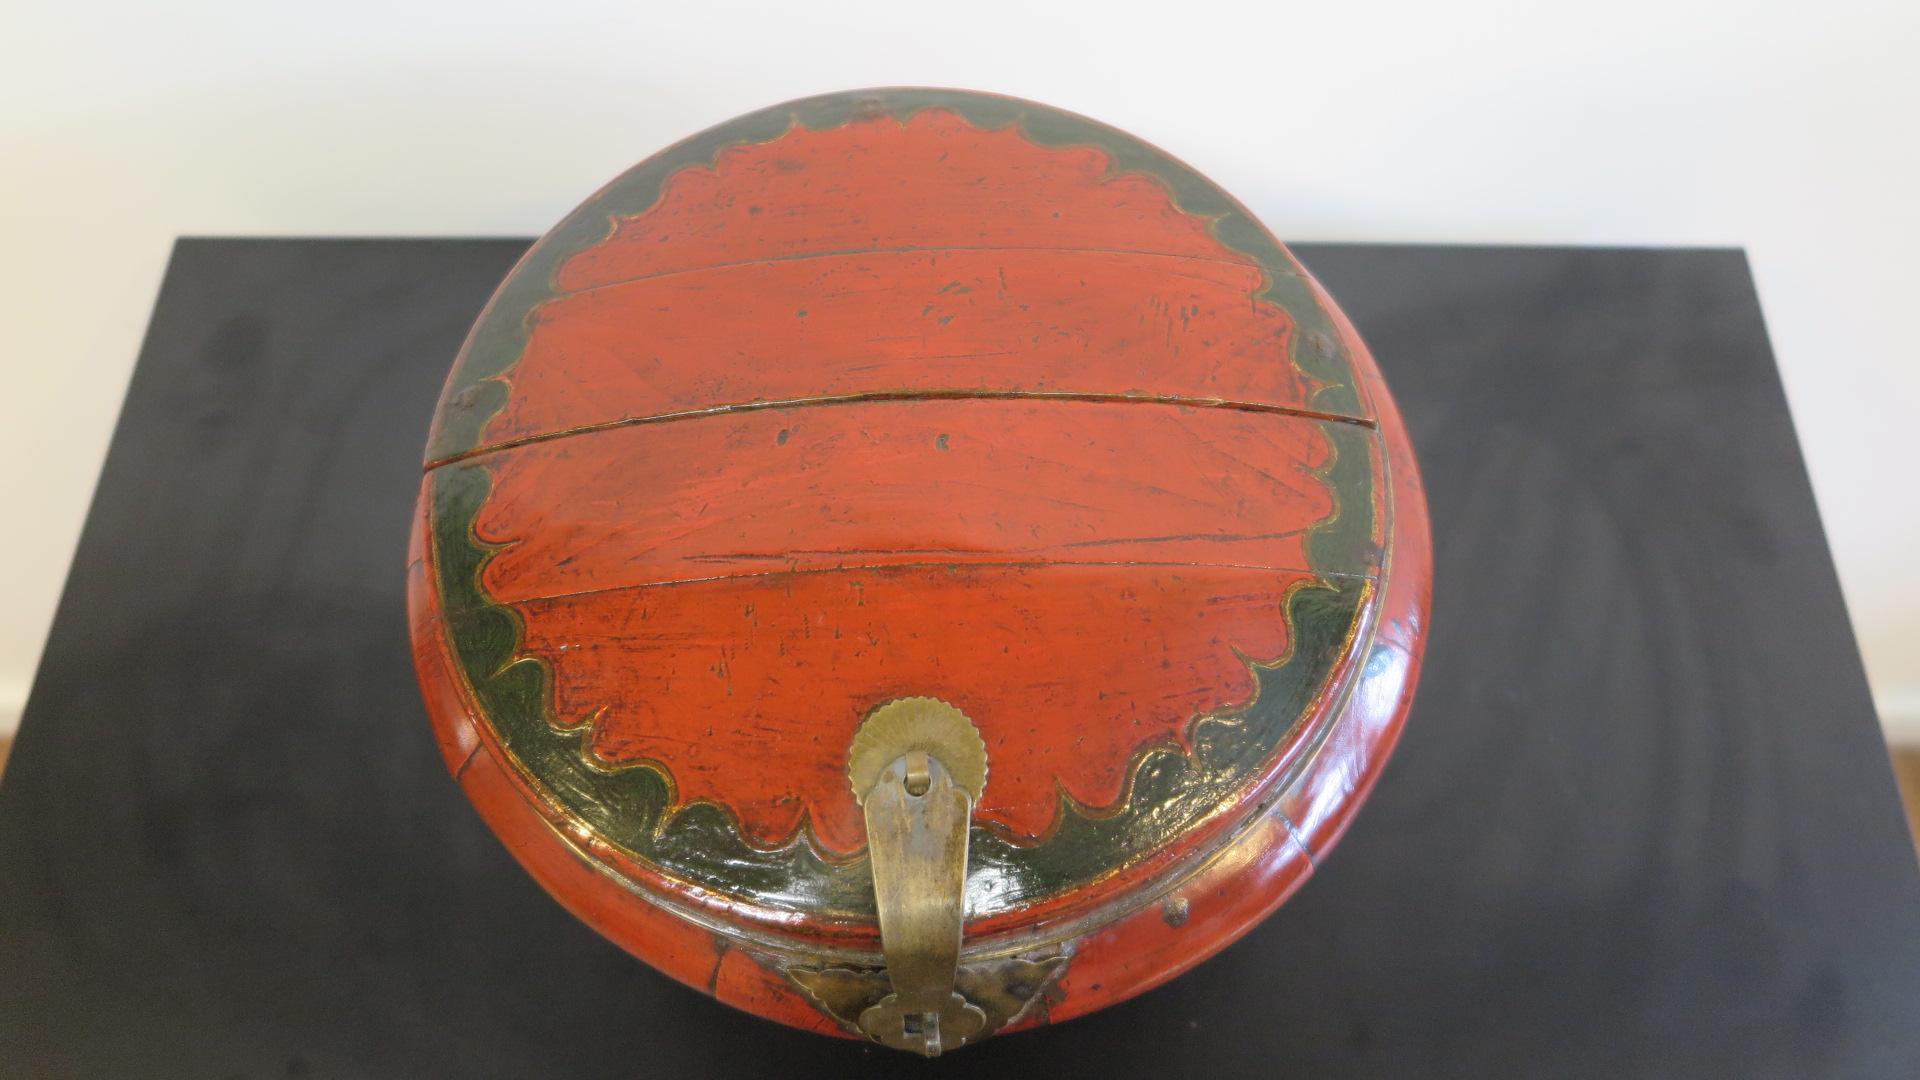 19th Century Chinese Fruit Box.  A wonderfully shaped antique box used for serving special fruits and candies.  Assembled sculpted pieces of elm wood creating this magnificent mushroom cap shaped box adorned in red lacquer and bronze hardware closer